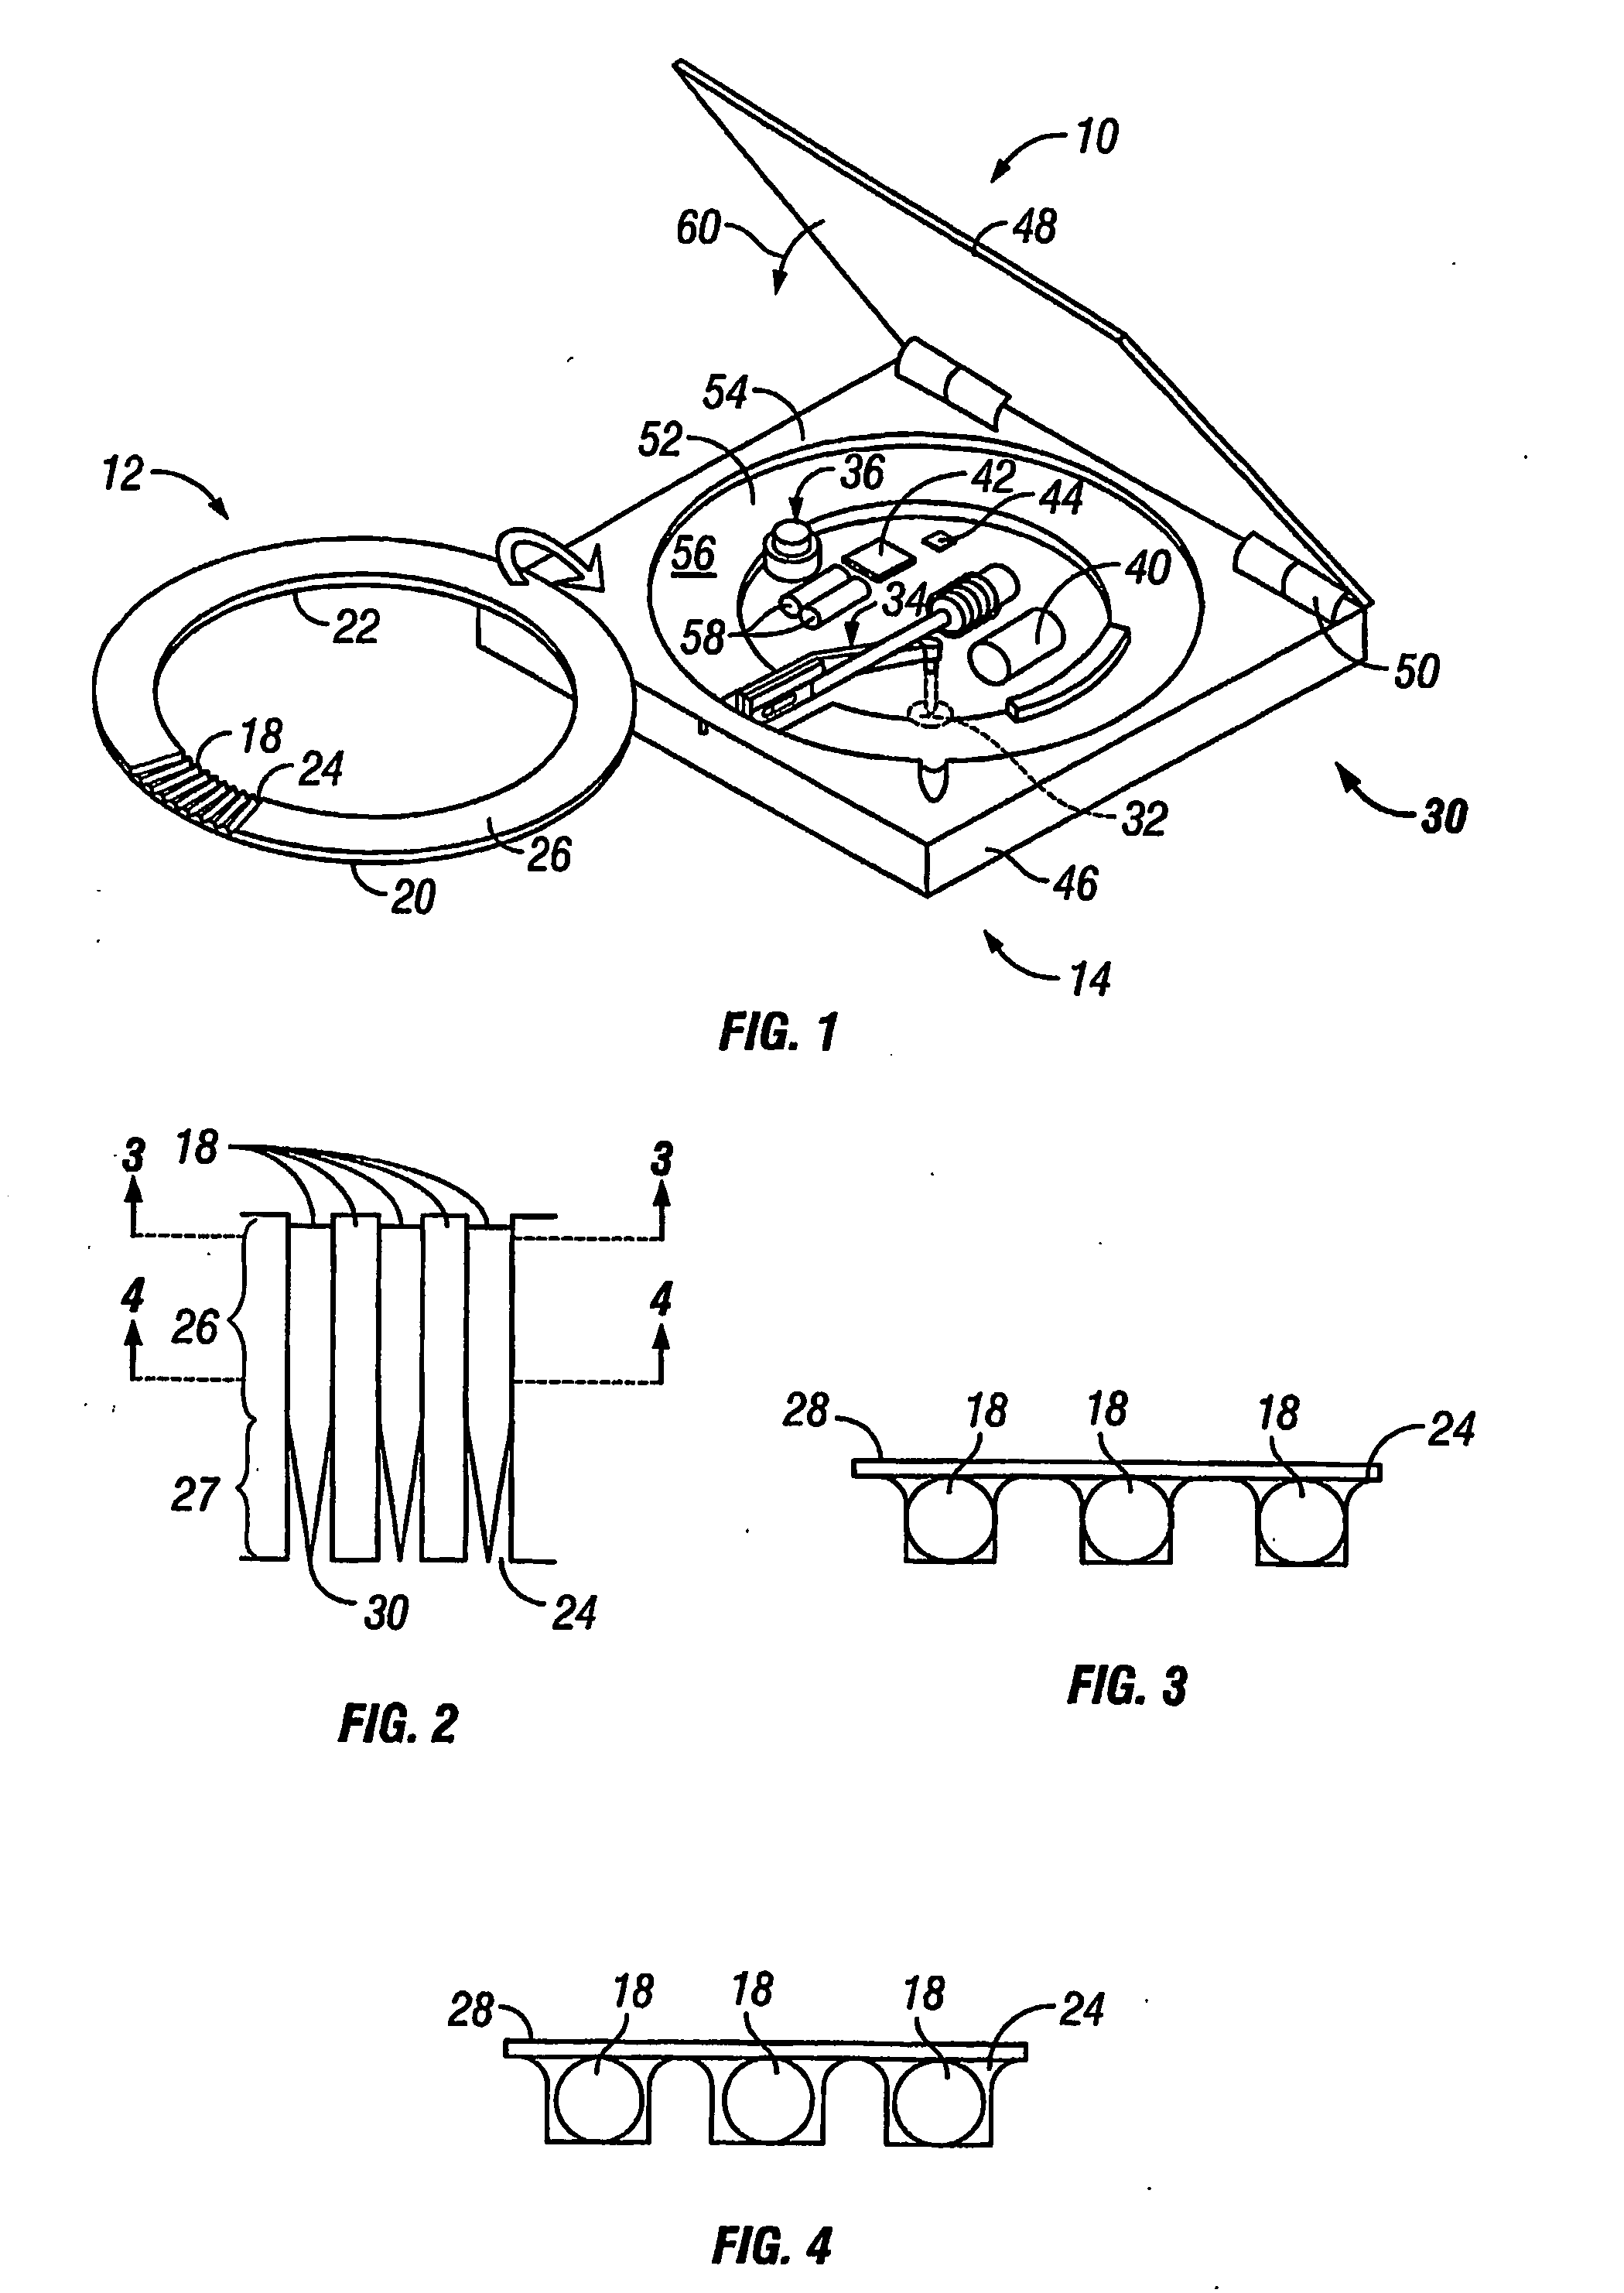 Method and apparatus using optical techniques to measure analyte levels